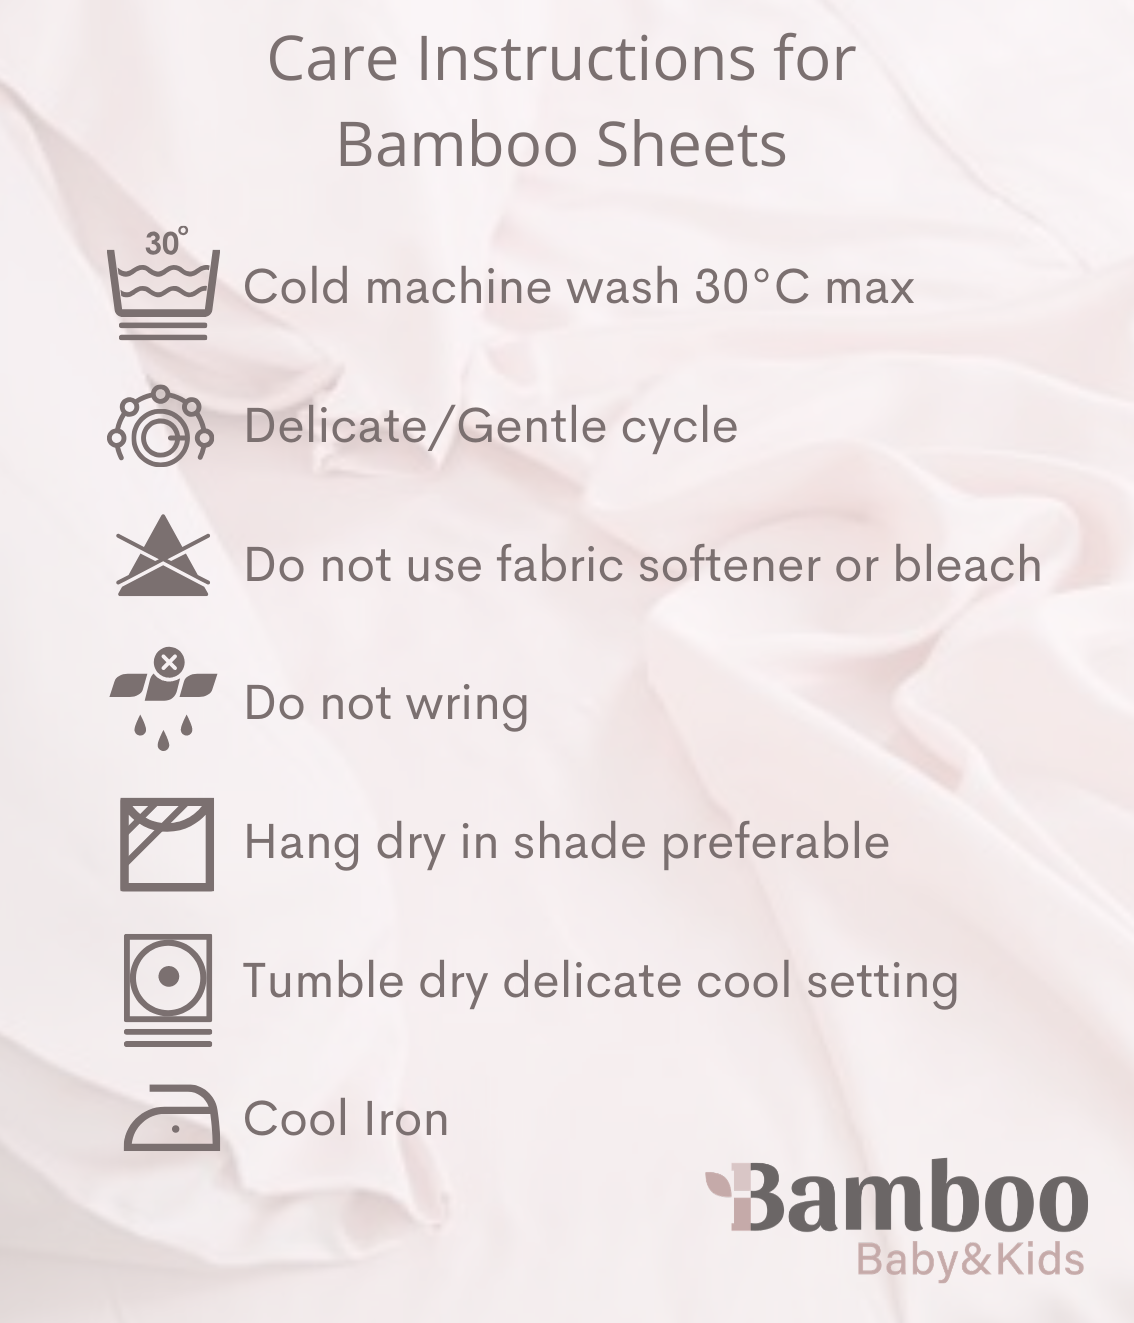 Bamboo Sheets Care Instructions